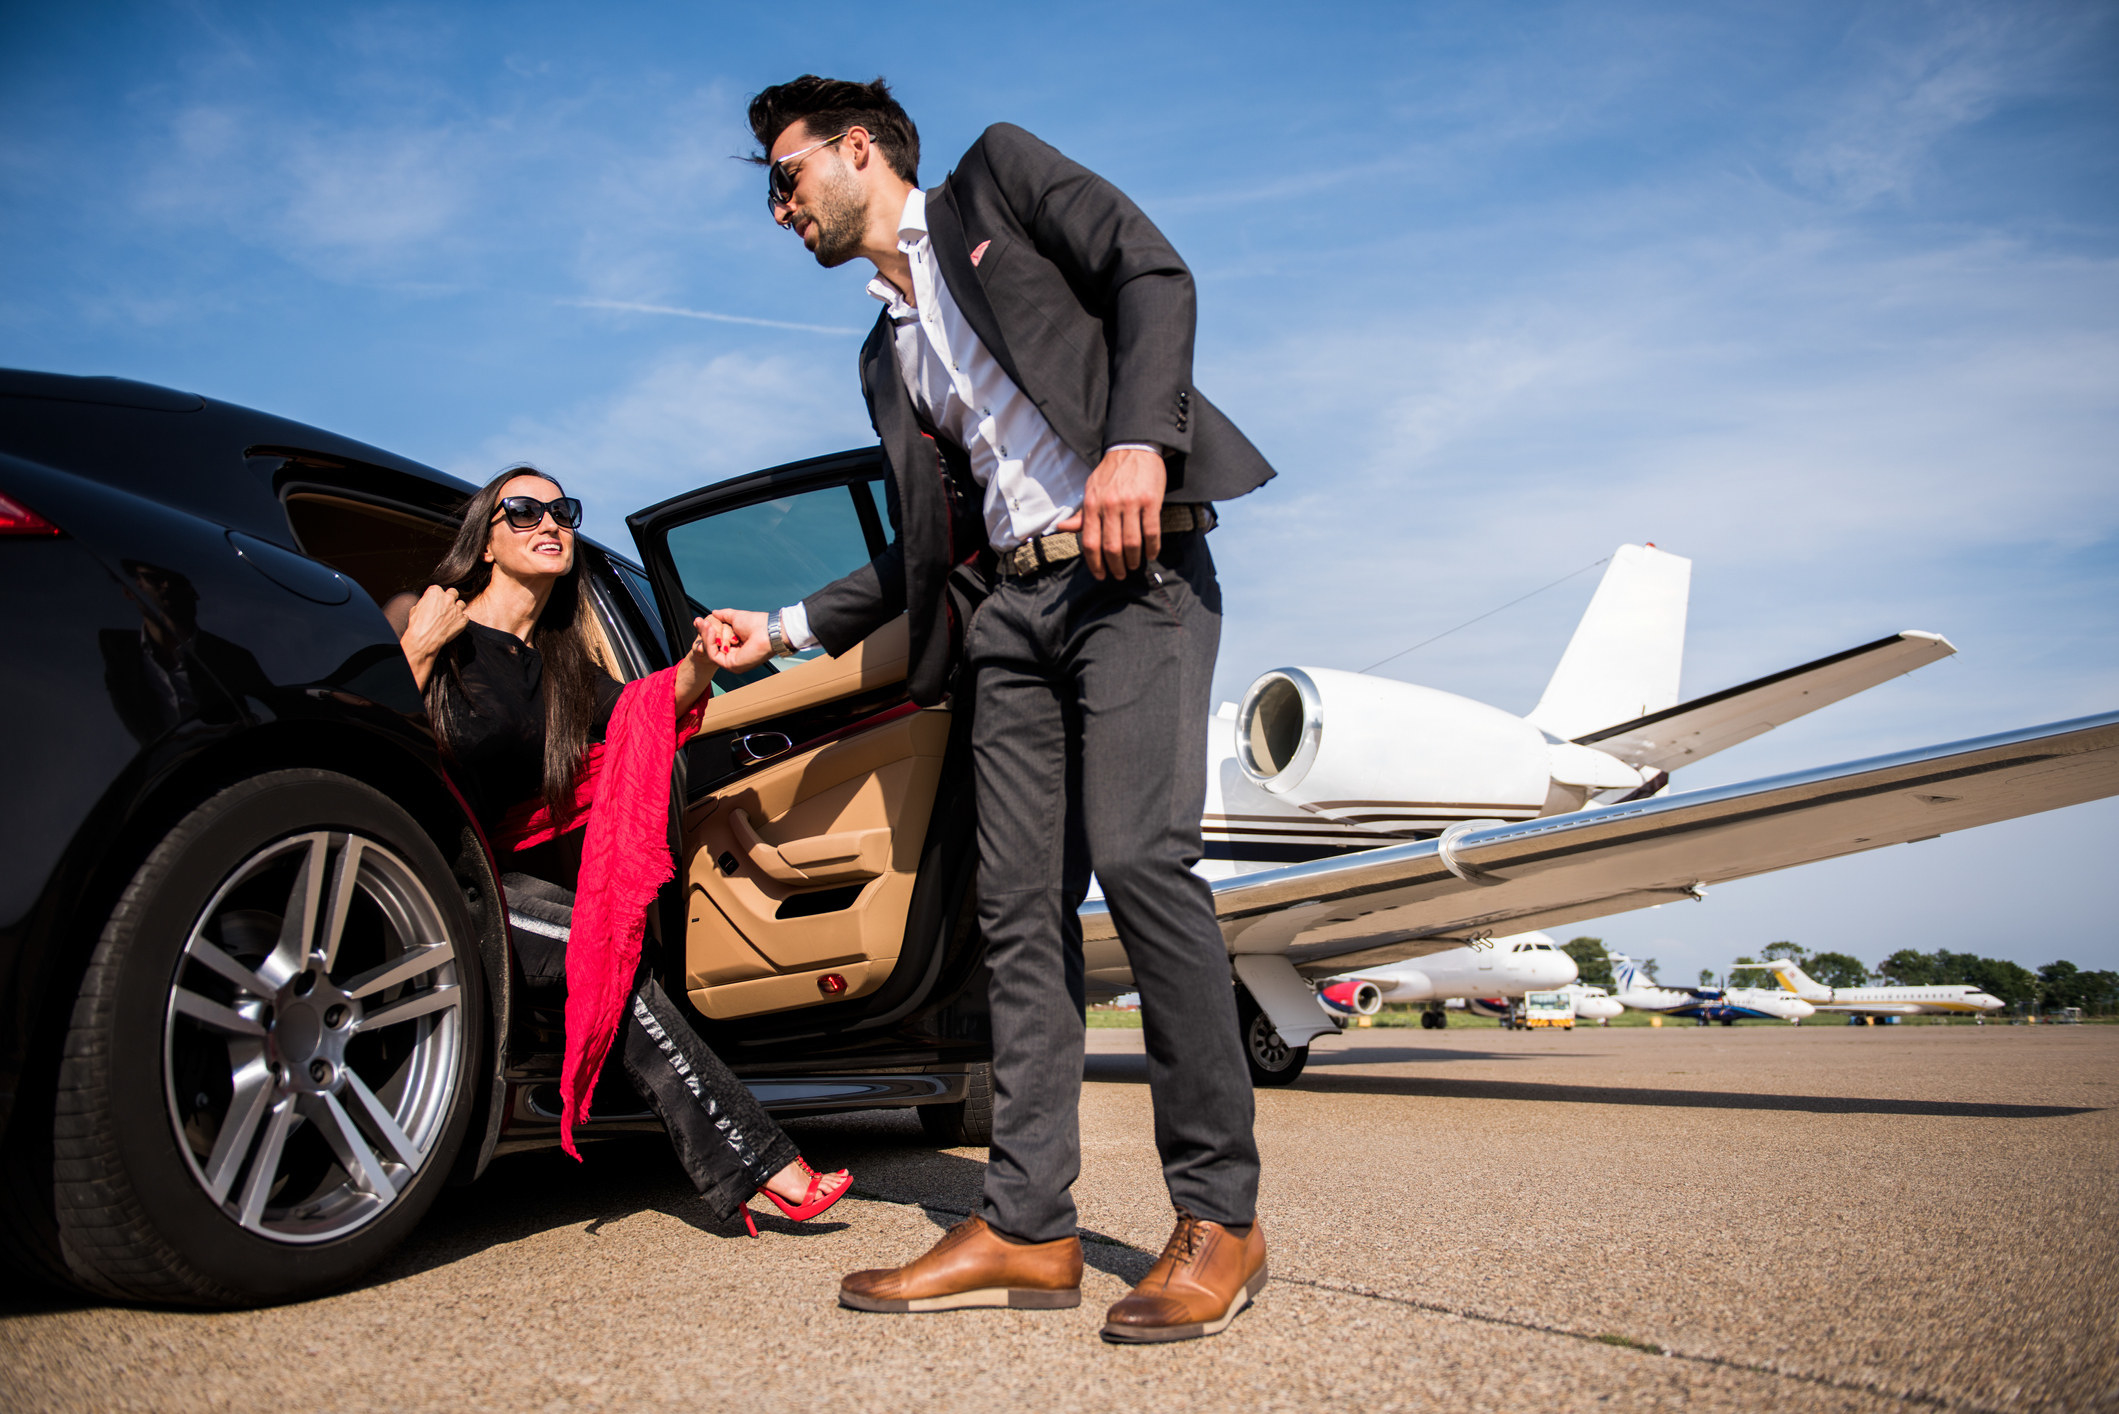 A man helping a woman exit a car on the tarmac